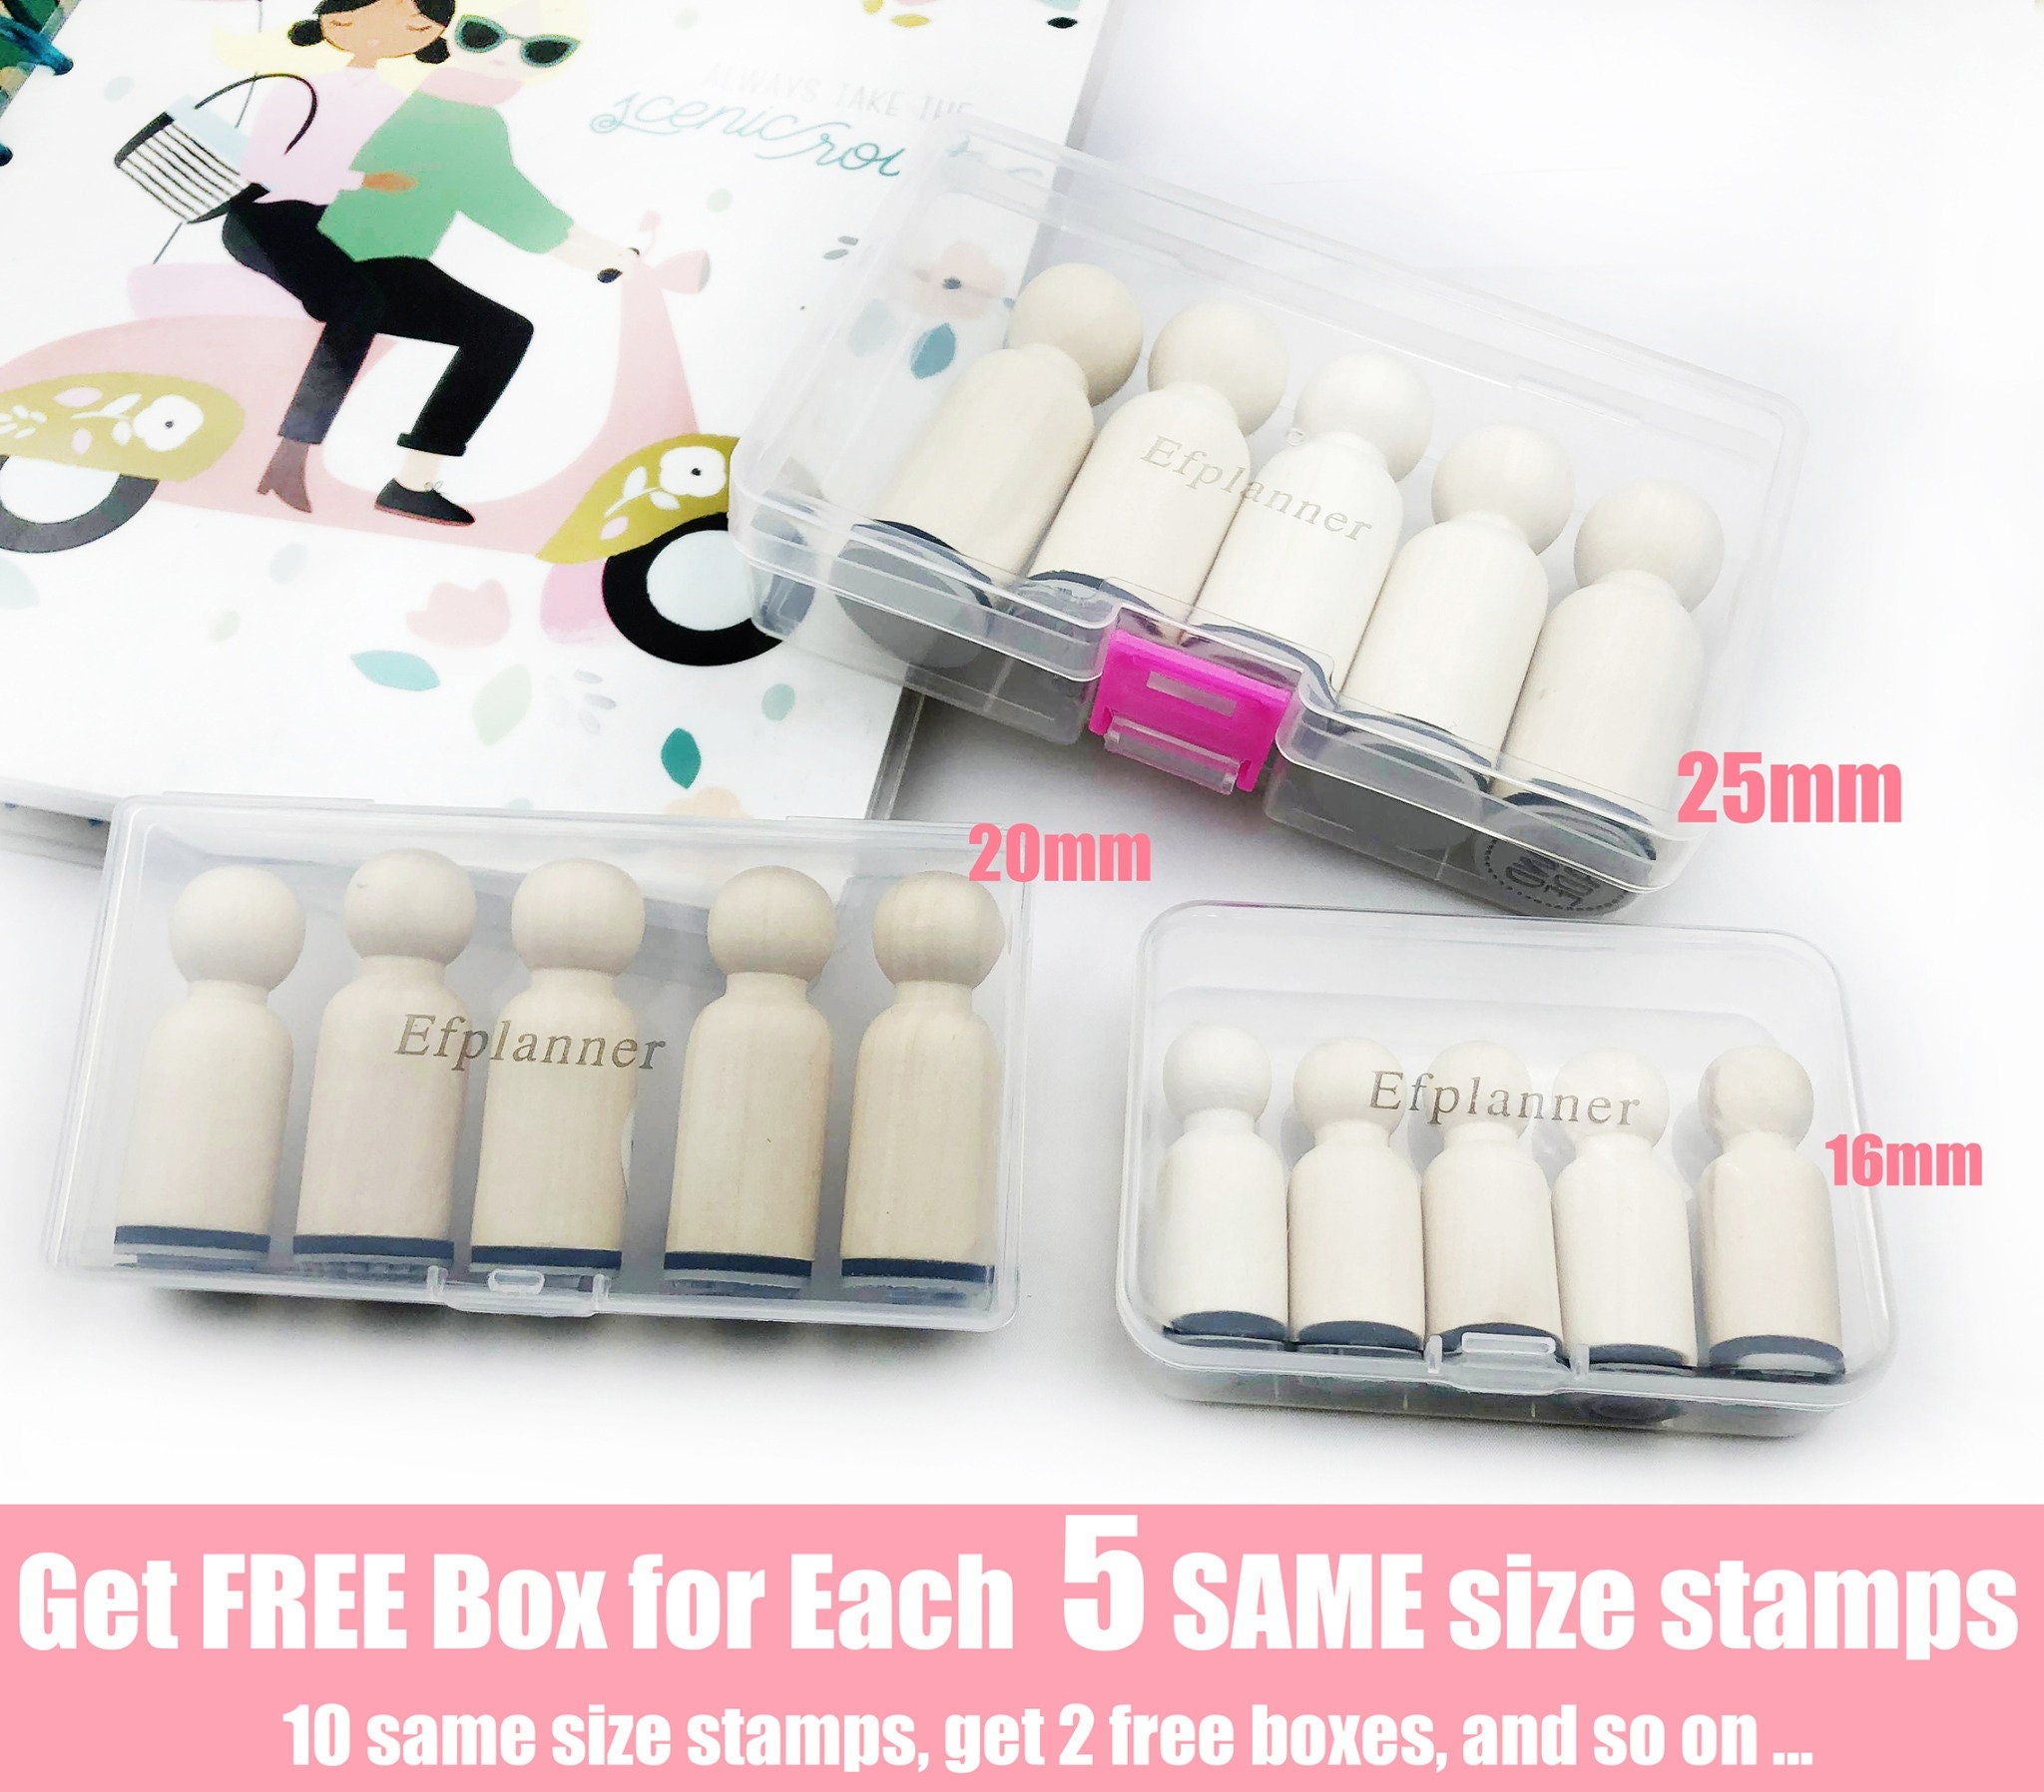 20mm Mini Stamps 16mm S120 Planner Stamp Scolopendra Stamp Chilopod Stamp Centipede Rubber Stamp